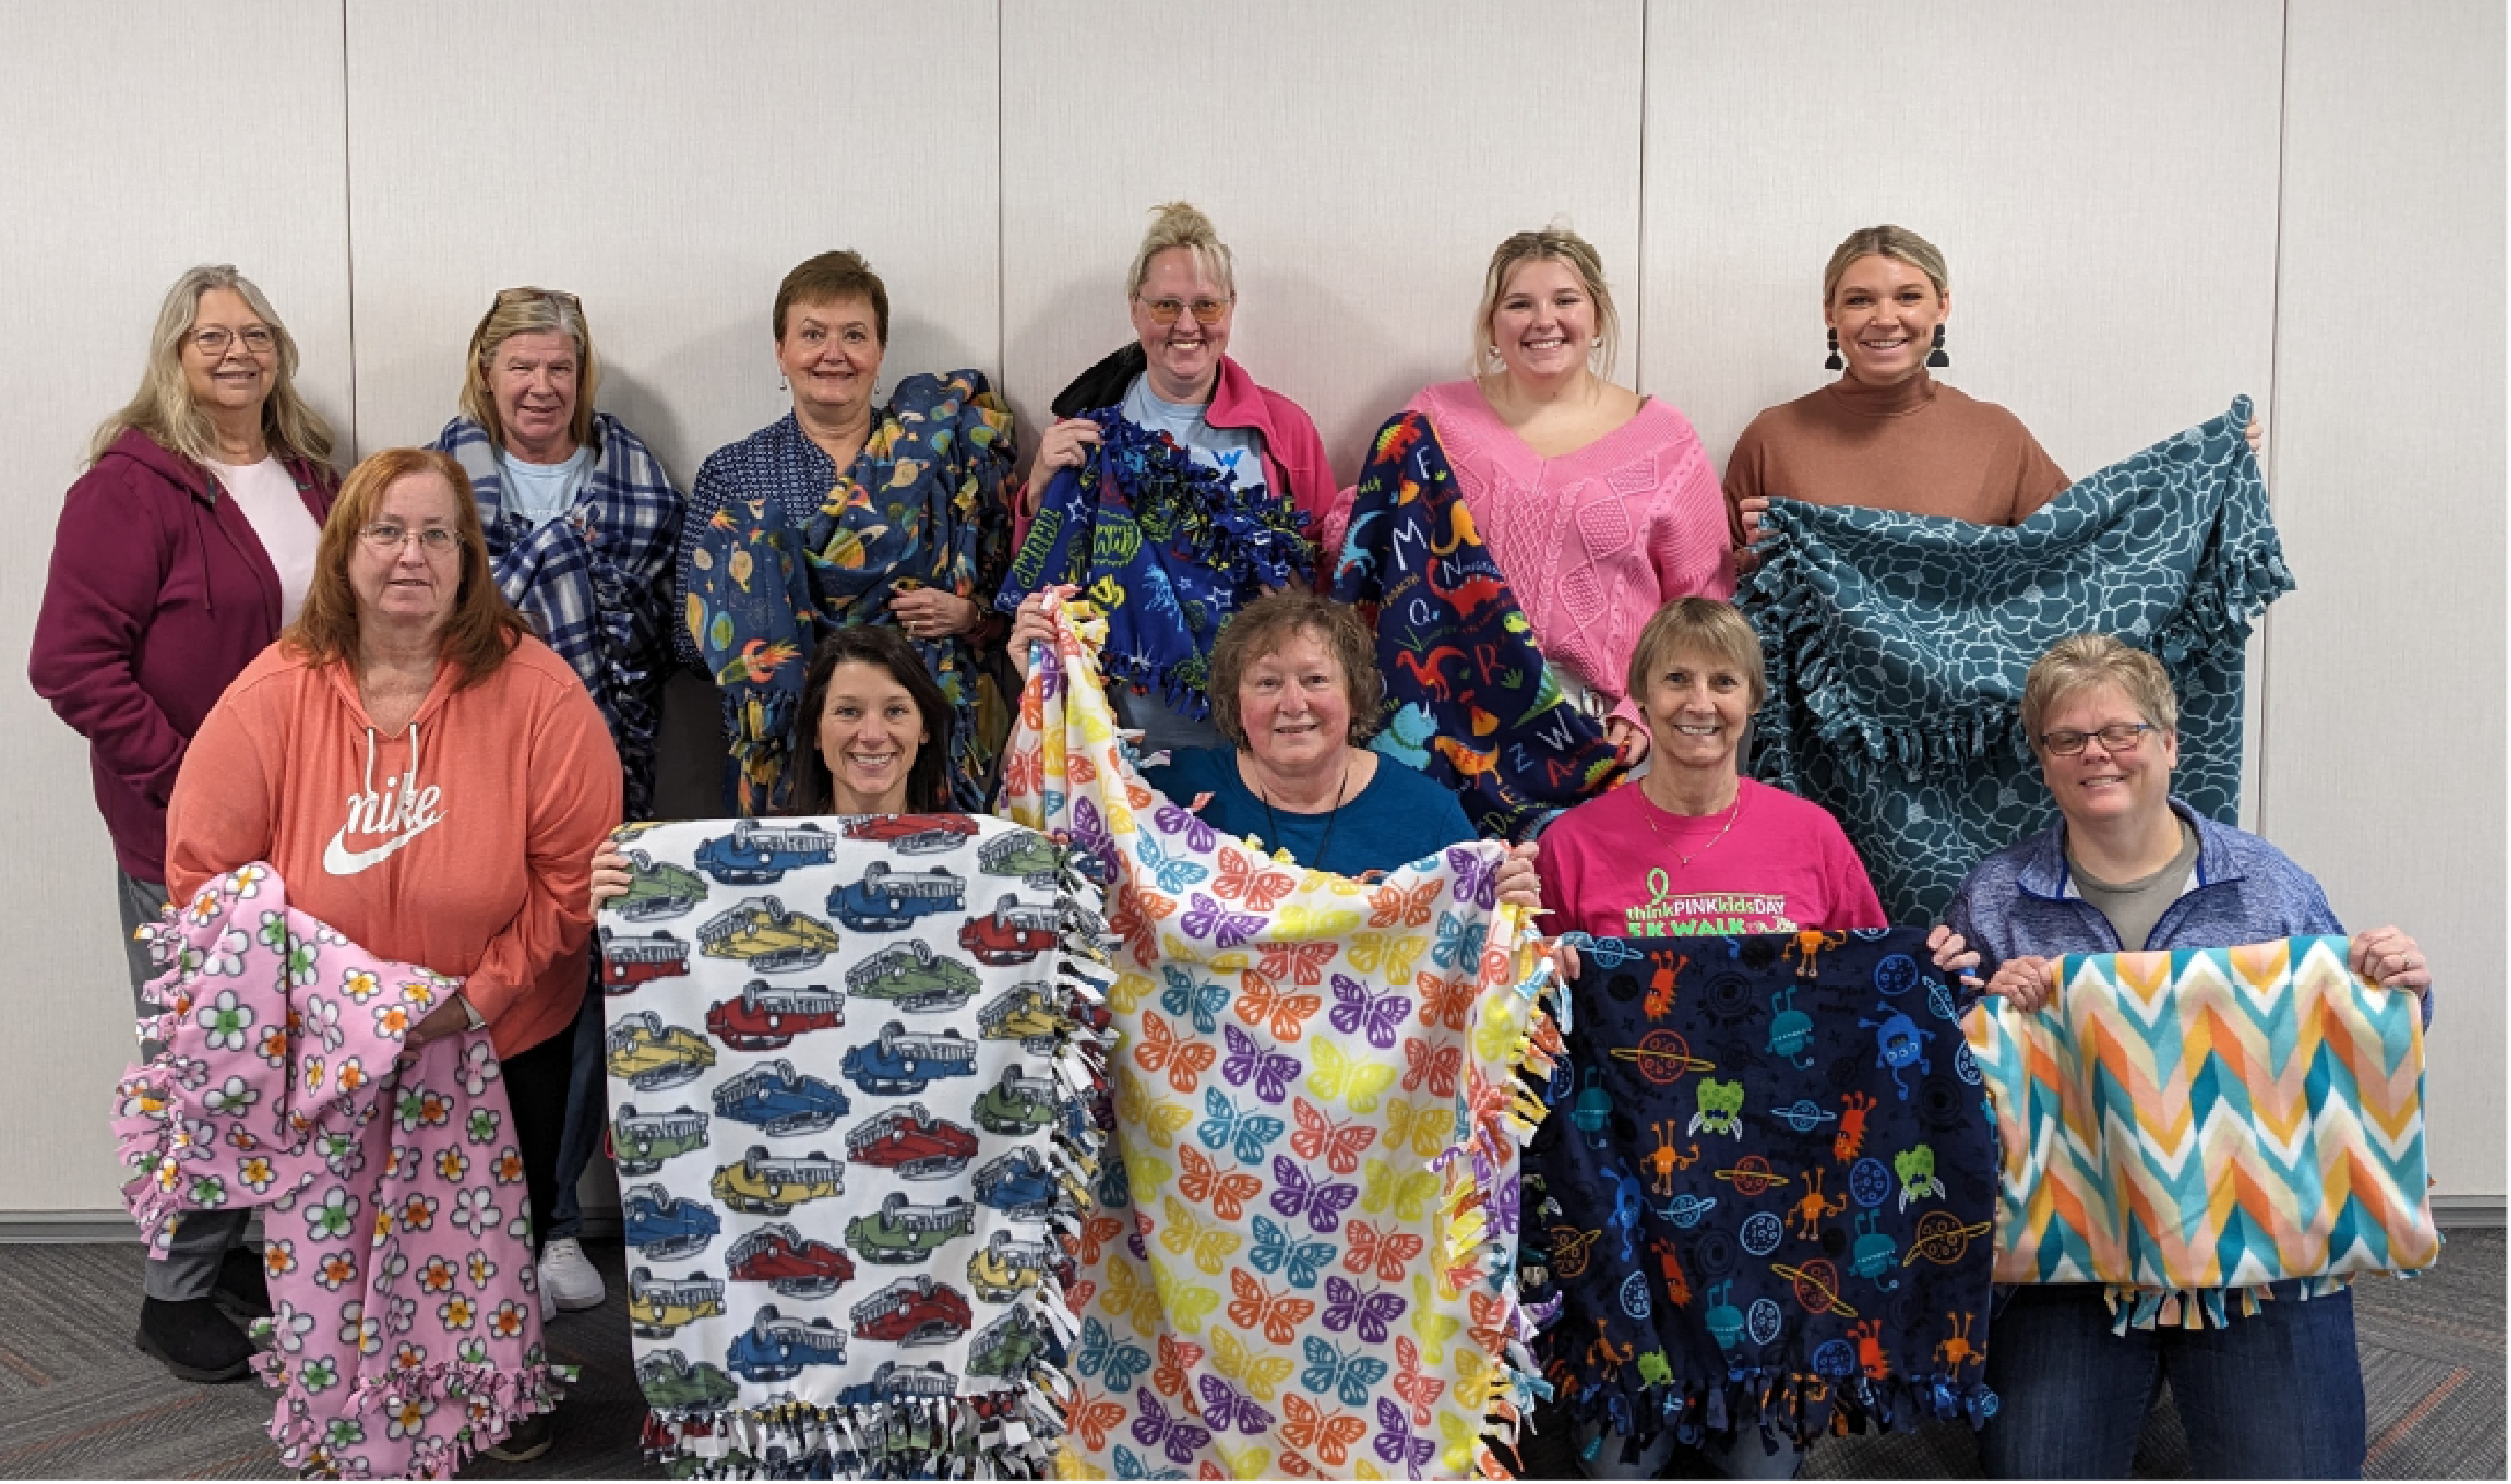 Western National employees smiling for the camera and holding up blankets that they helped make for Project Linus.